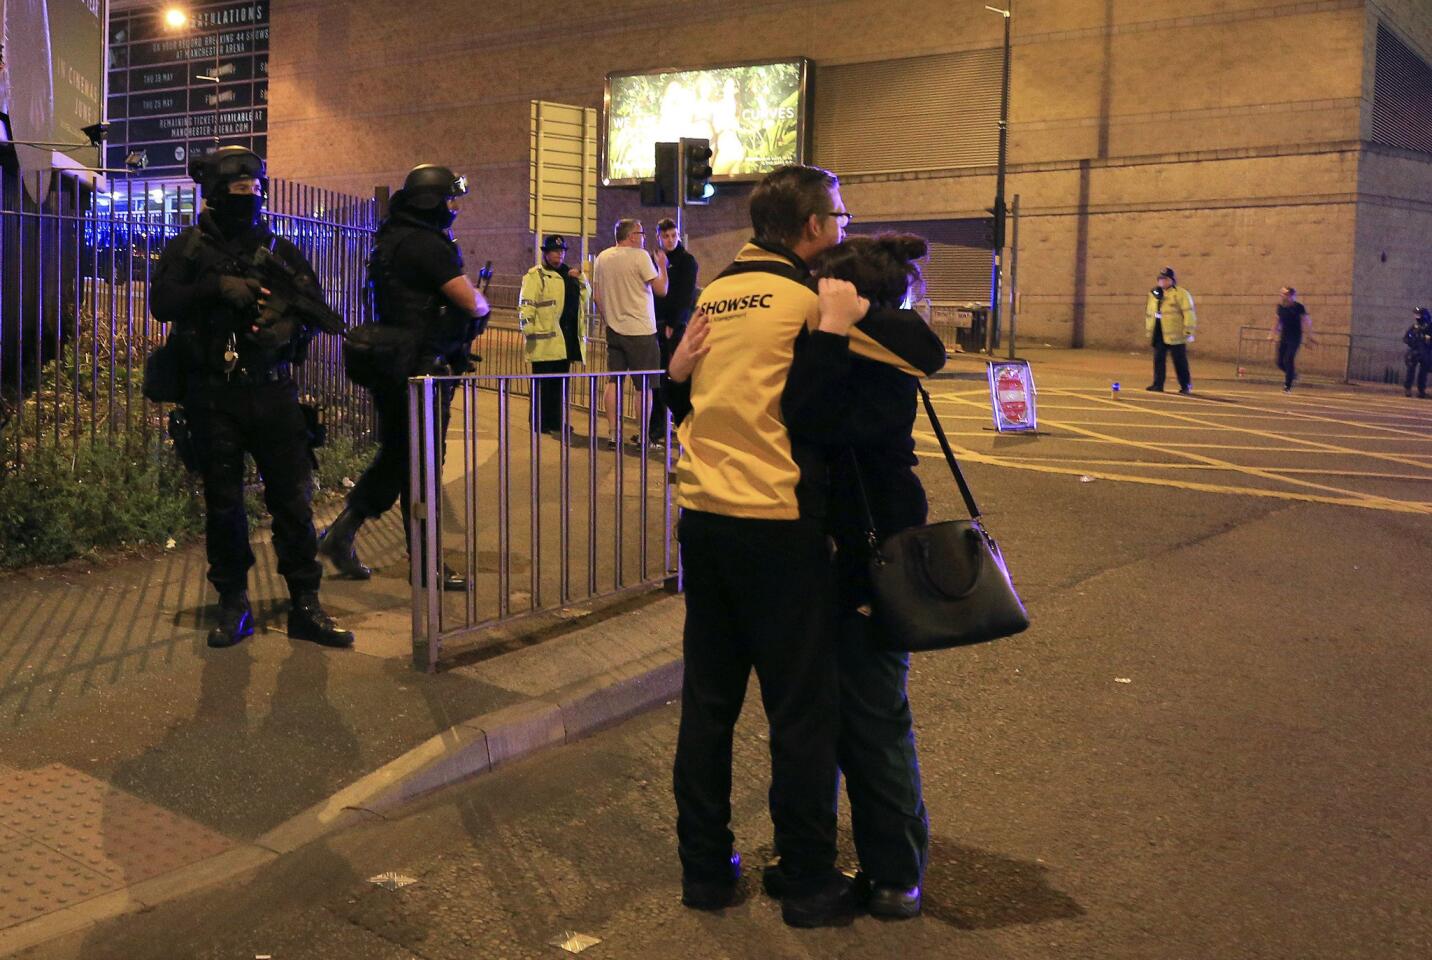 Armed police stand guard at Manchester Arena after reports of an explosion after an Ariana Grande concert.